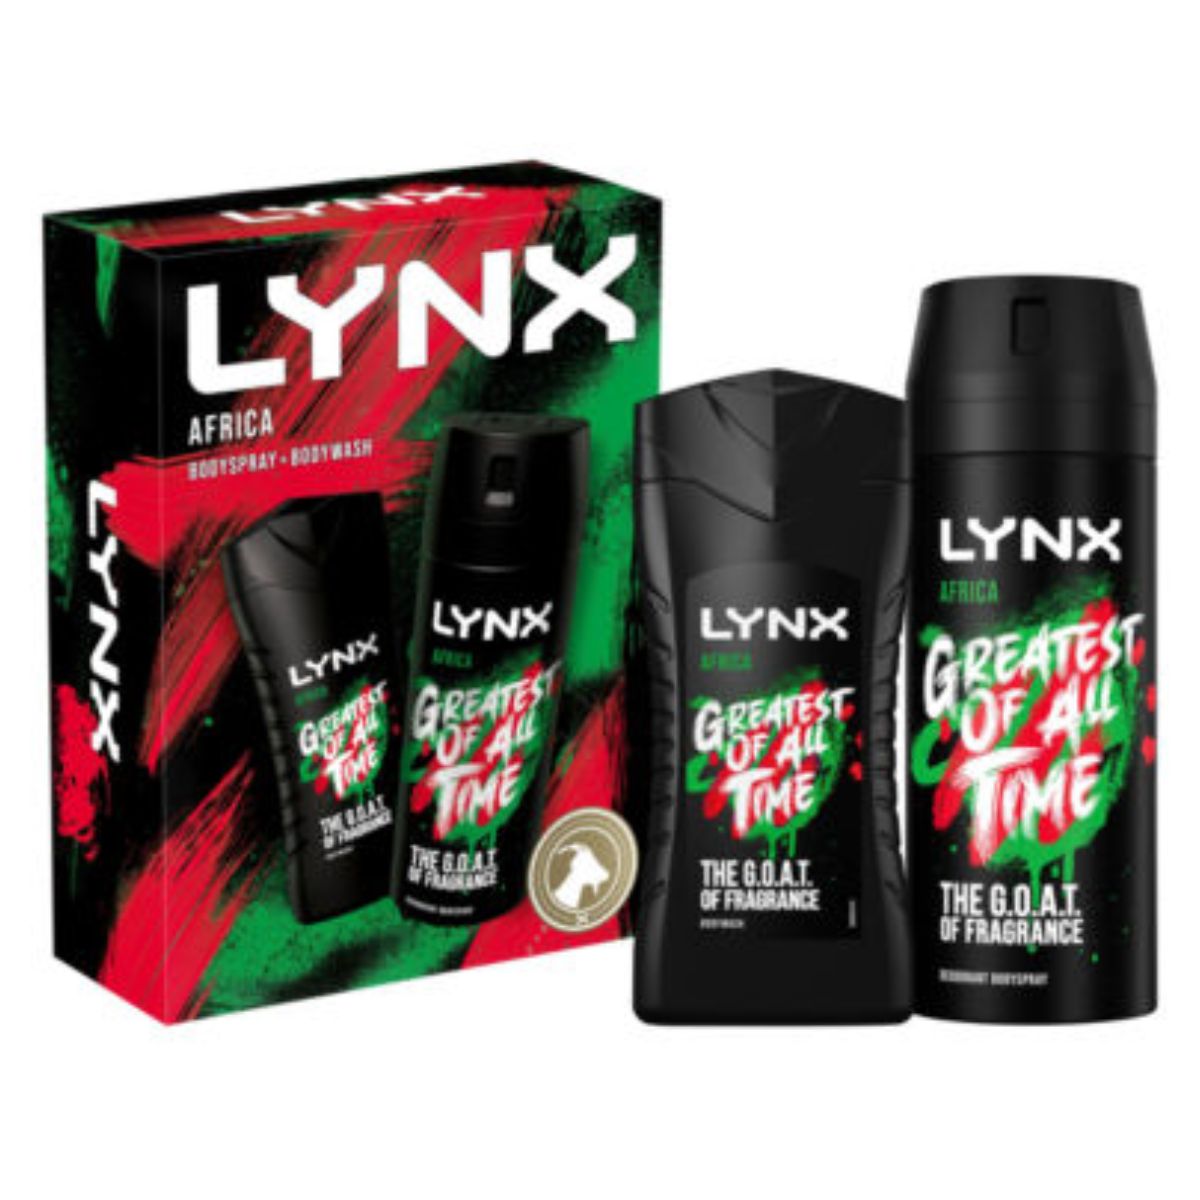 Lynx - Body Spray Gift Set Africa Duo greatest of time.